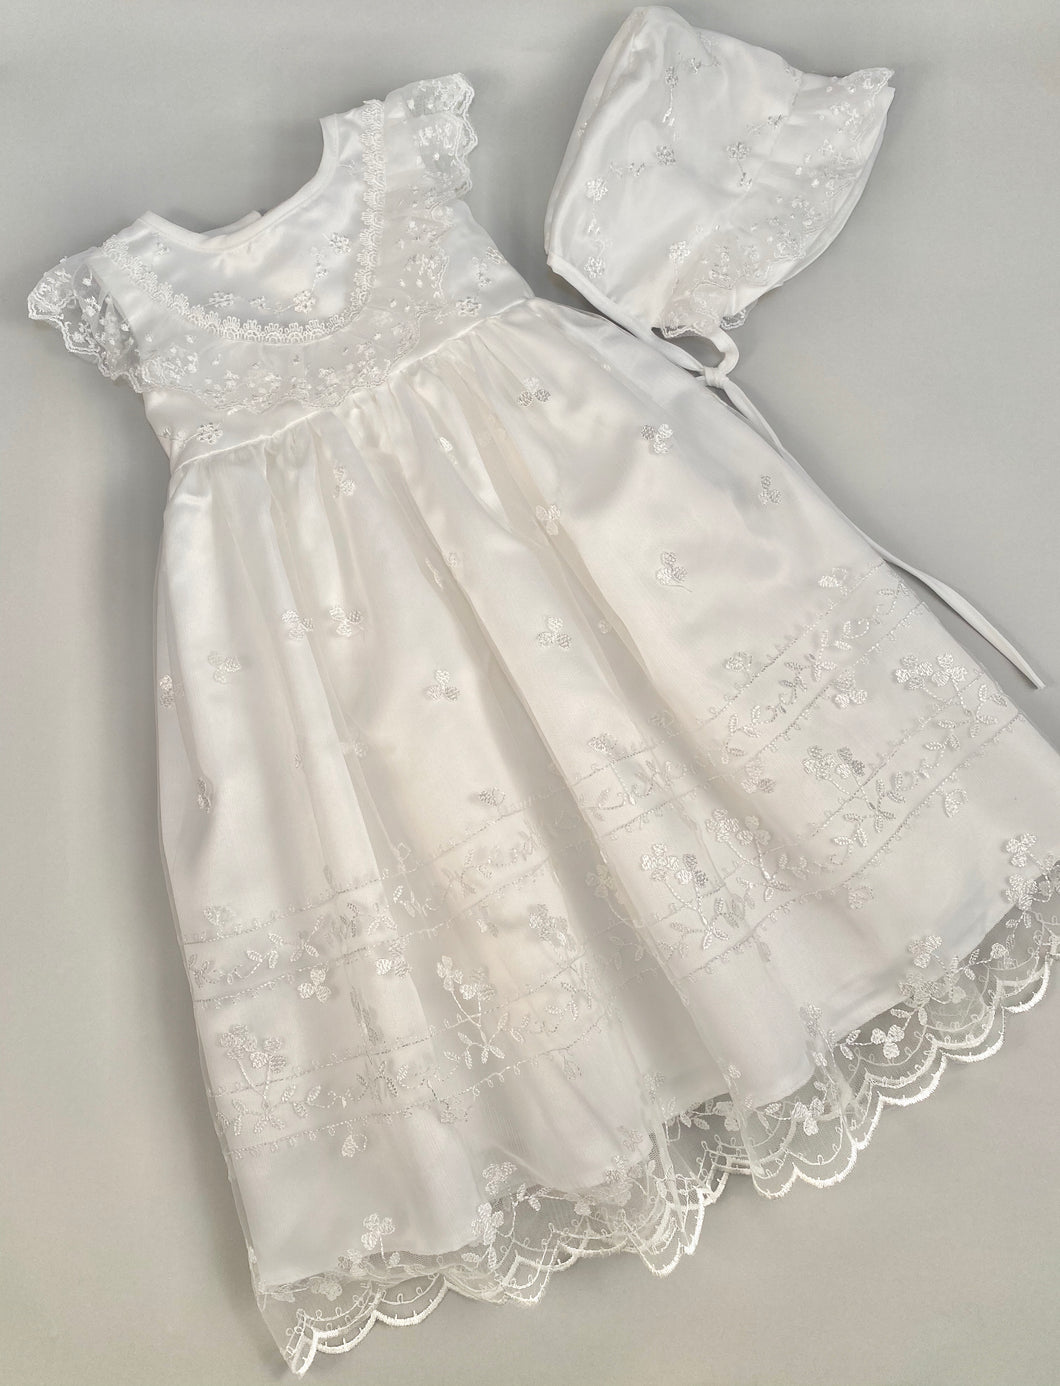 Lace Gown 3 Girls Christening Baptismal Lace Embroidered Gown with Matching Hat